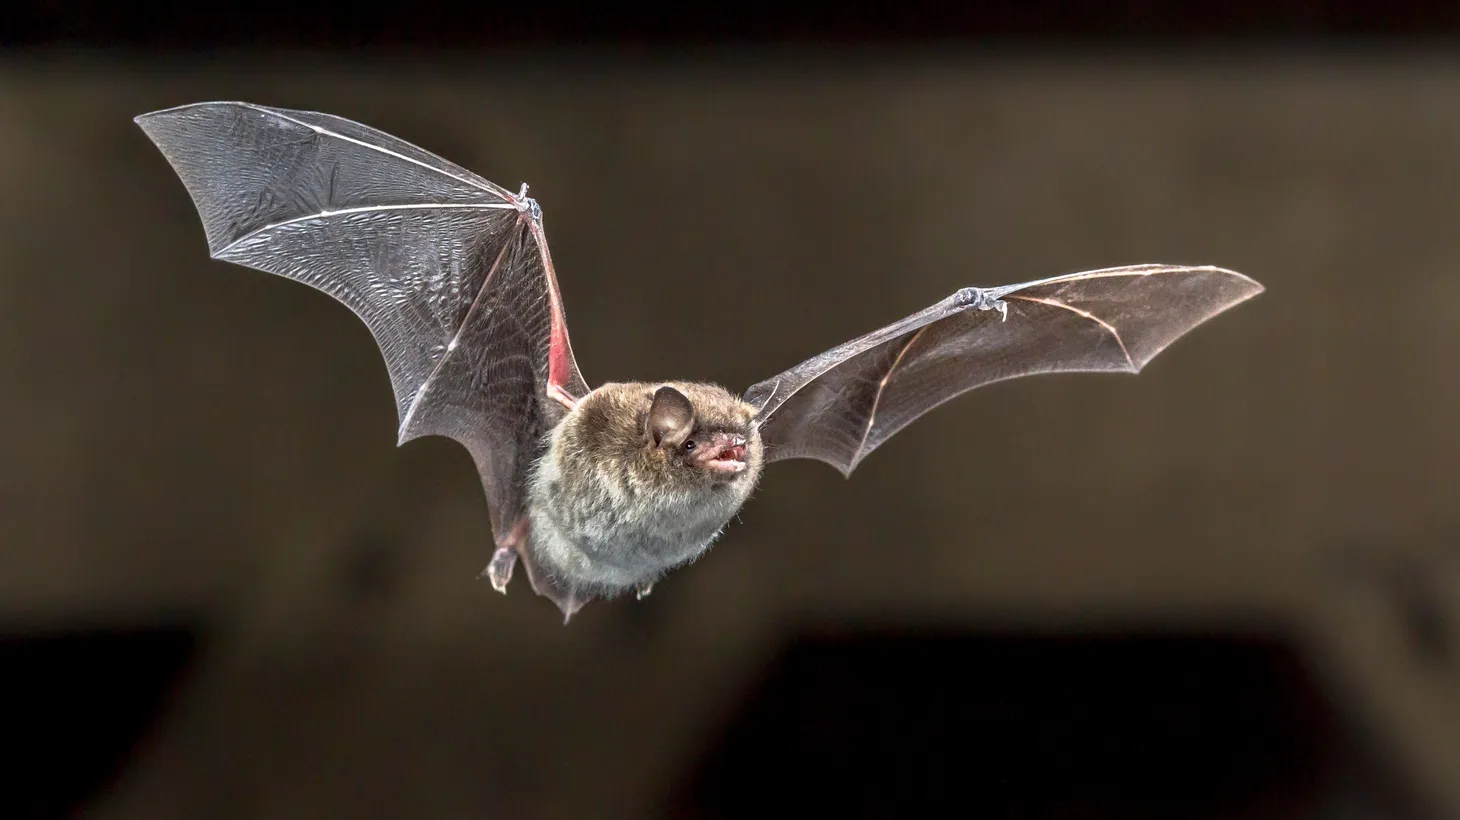 “[Bats have] been here for thousands and thousands of years … so let's do our part to make sure that they can stick around and be part of this community with us,” says Miguel Ordeñana.